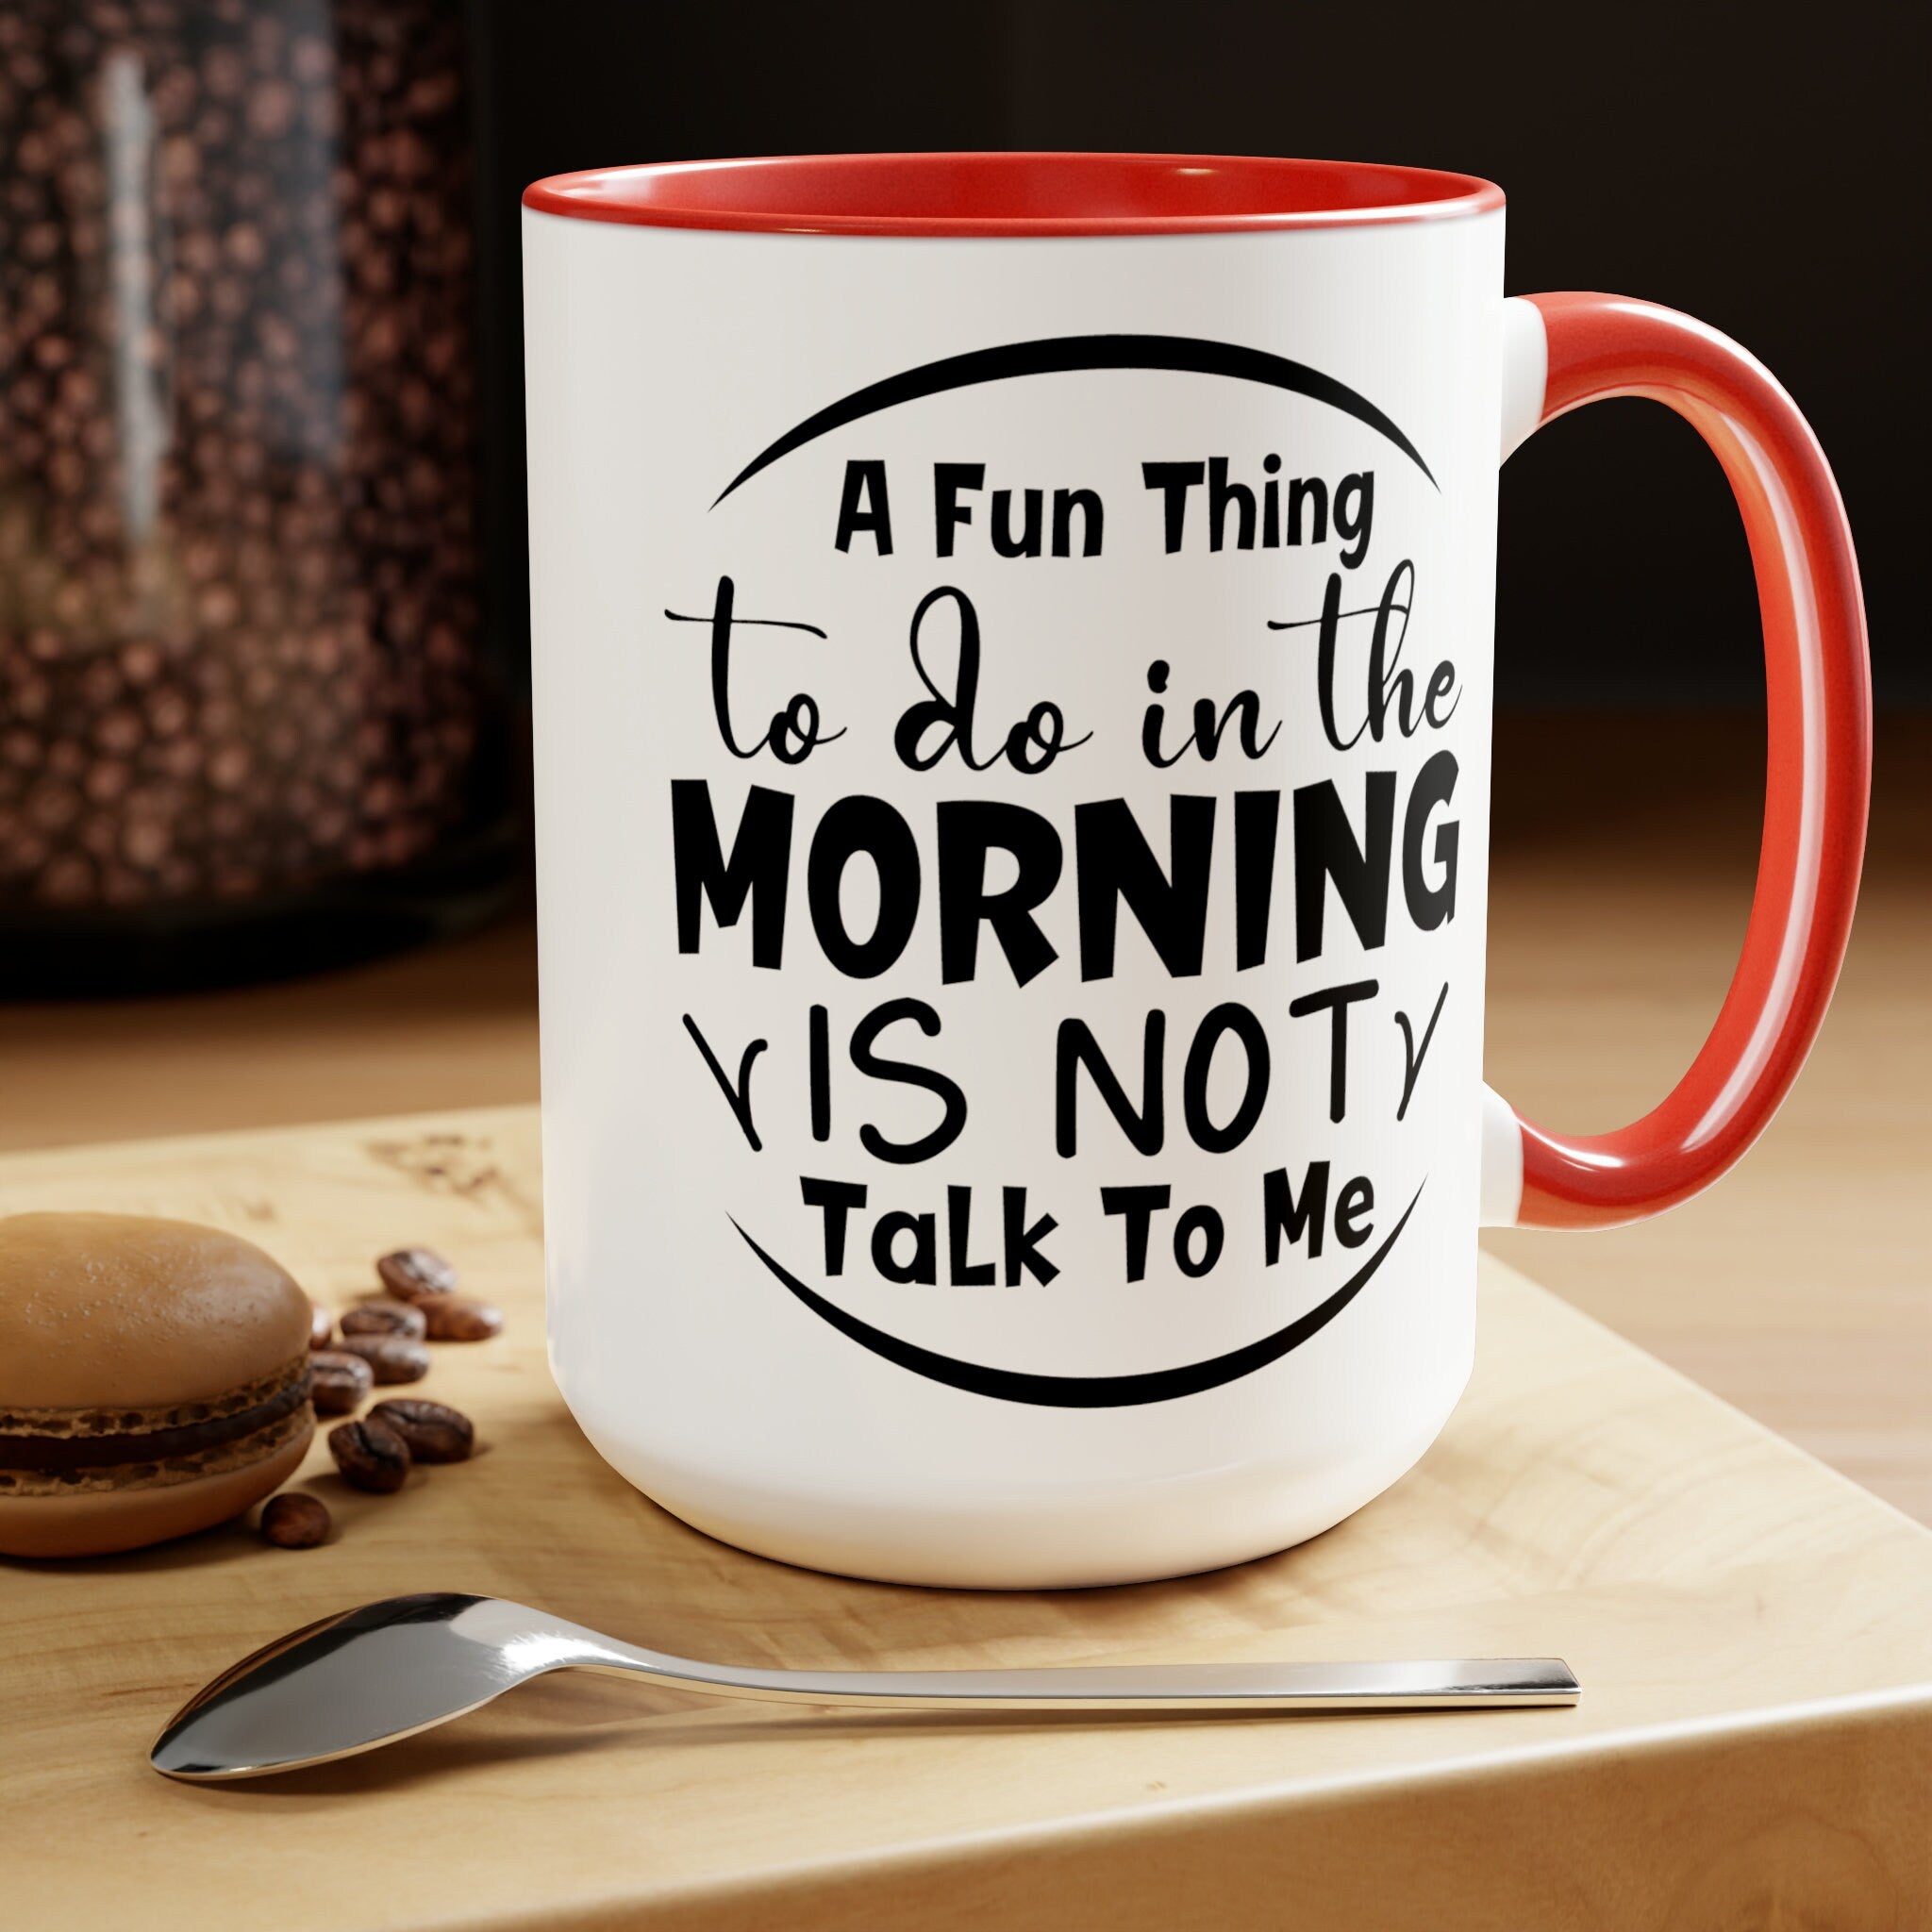 A Fun Thing To Do In The Morning Is Not Talk To Me Two-Tone Coffee Mugs, 15oz Sarcastic Mug, Coworker Mug